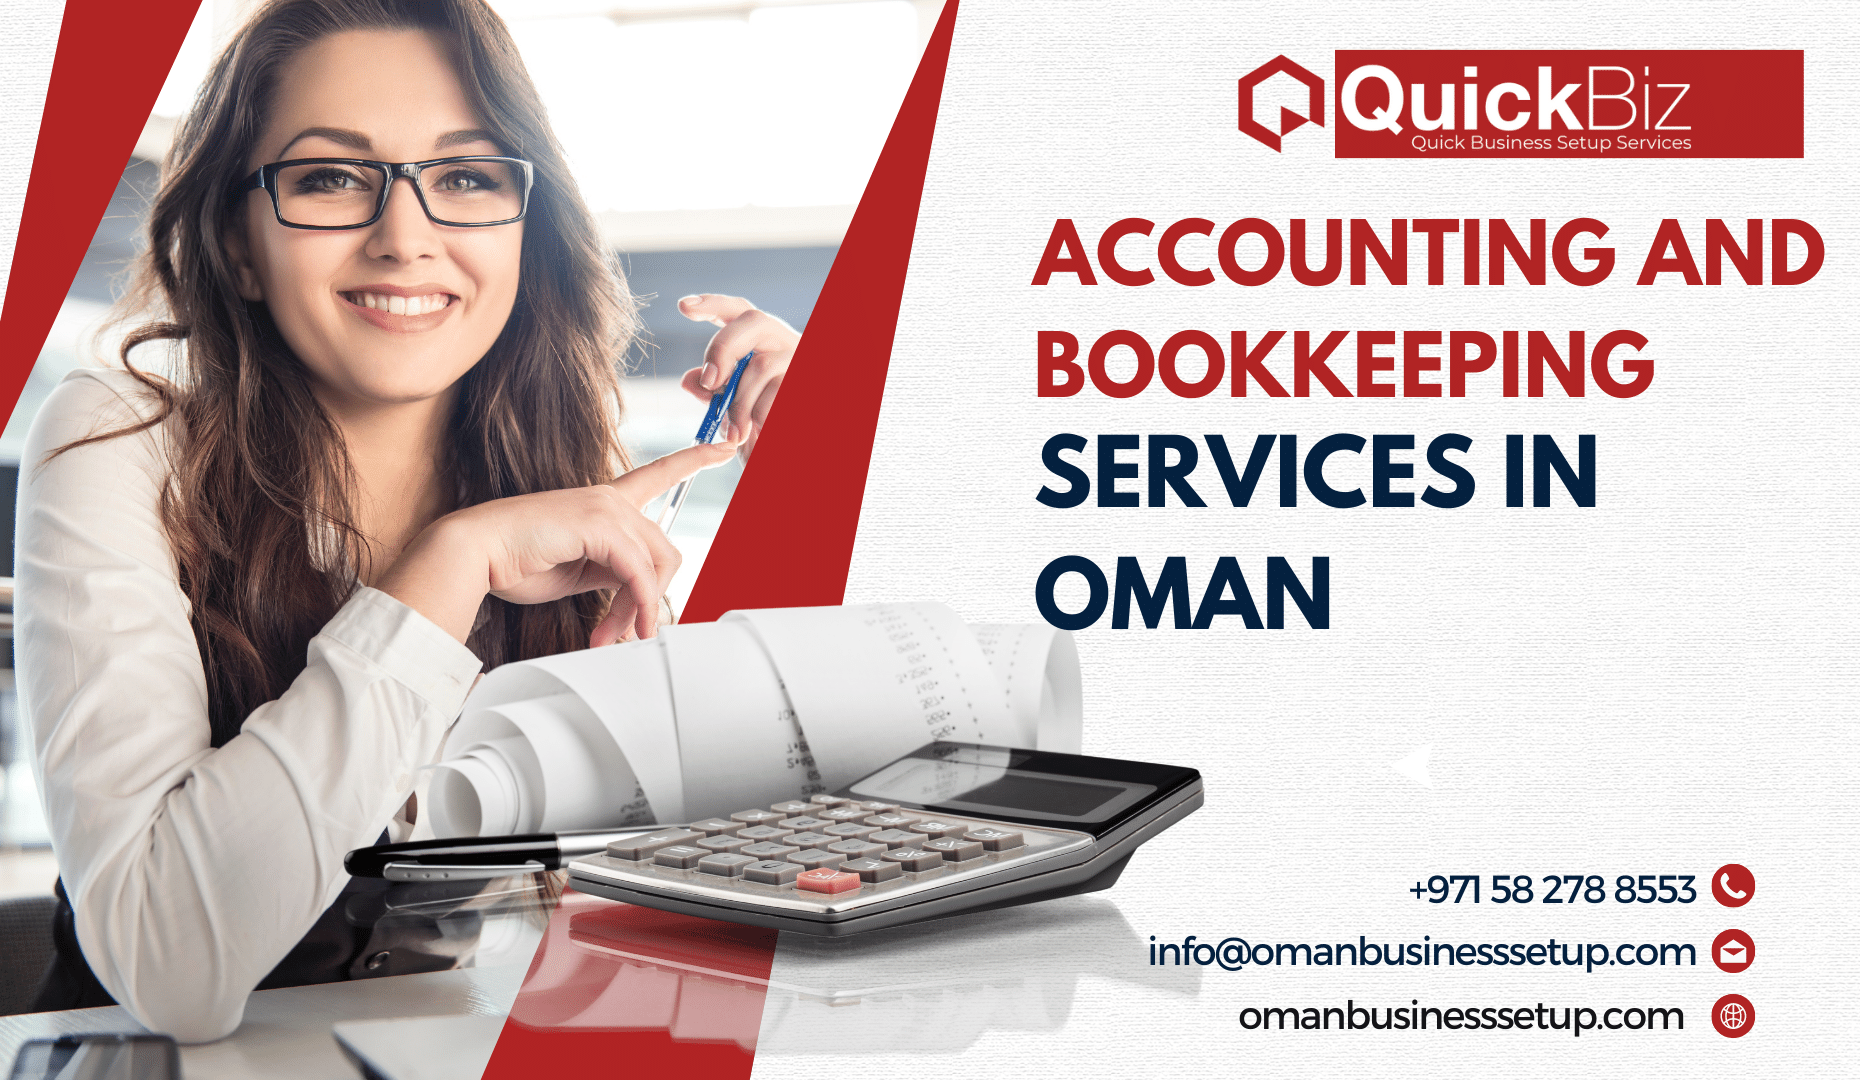 quickbiz Accounting and Bookkeeping Services in Oman